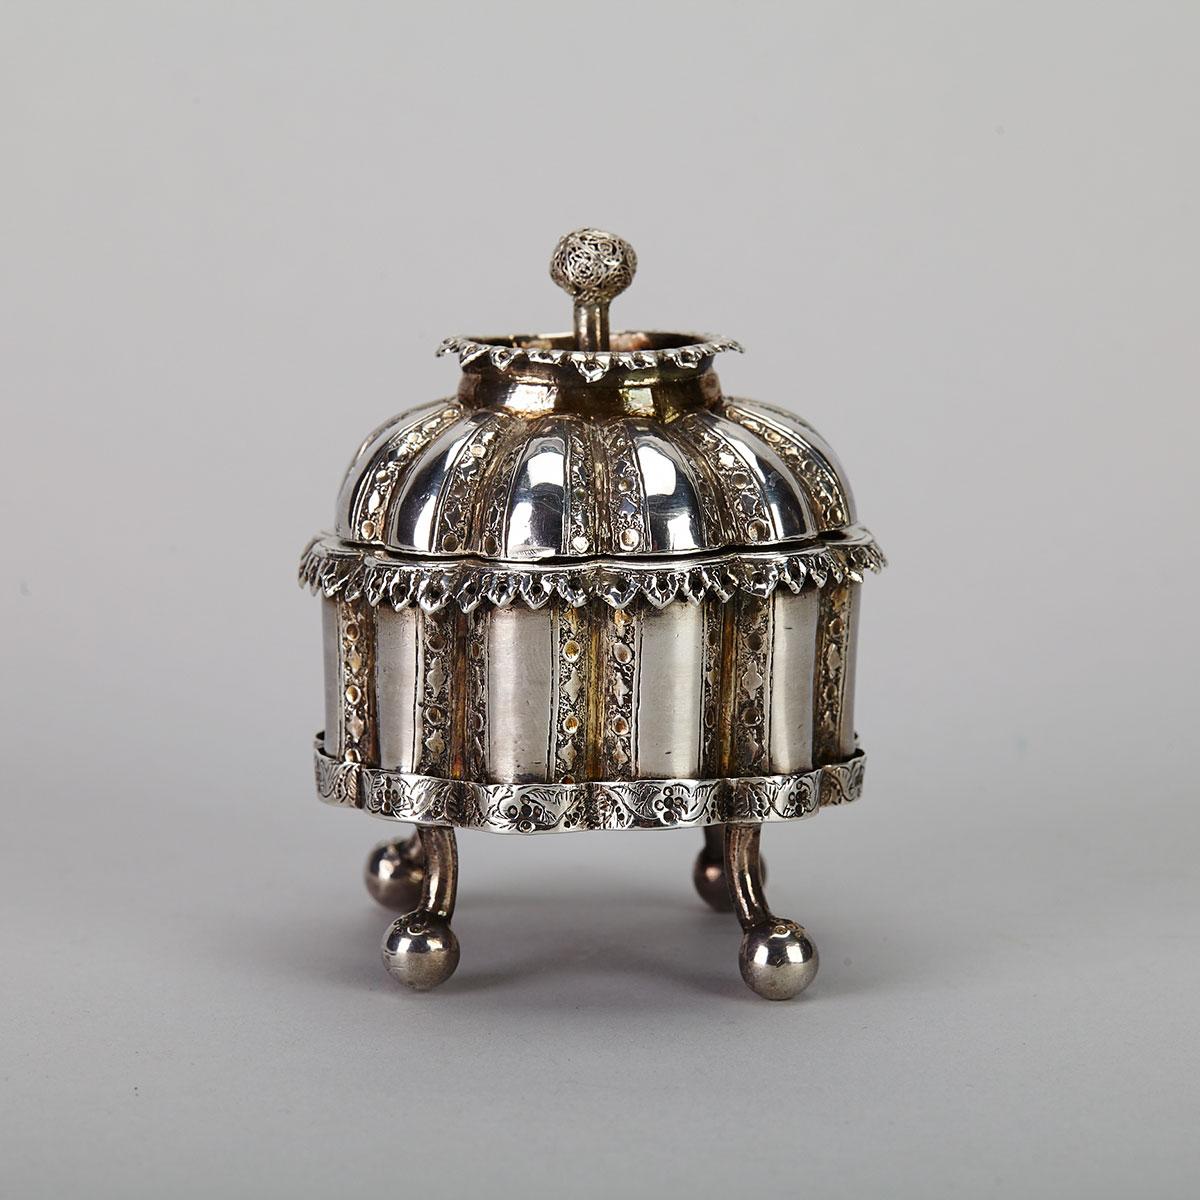 Middle-Eastern Silver Covered Inkwell on Stand, 19th century